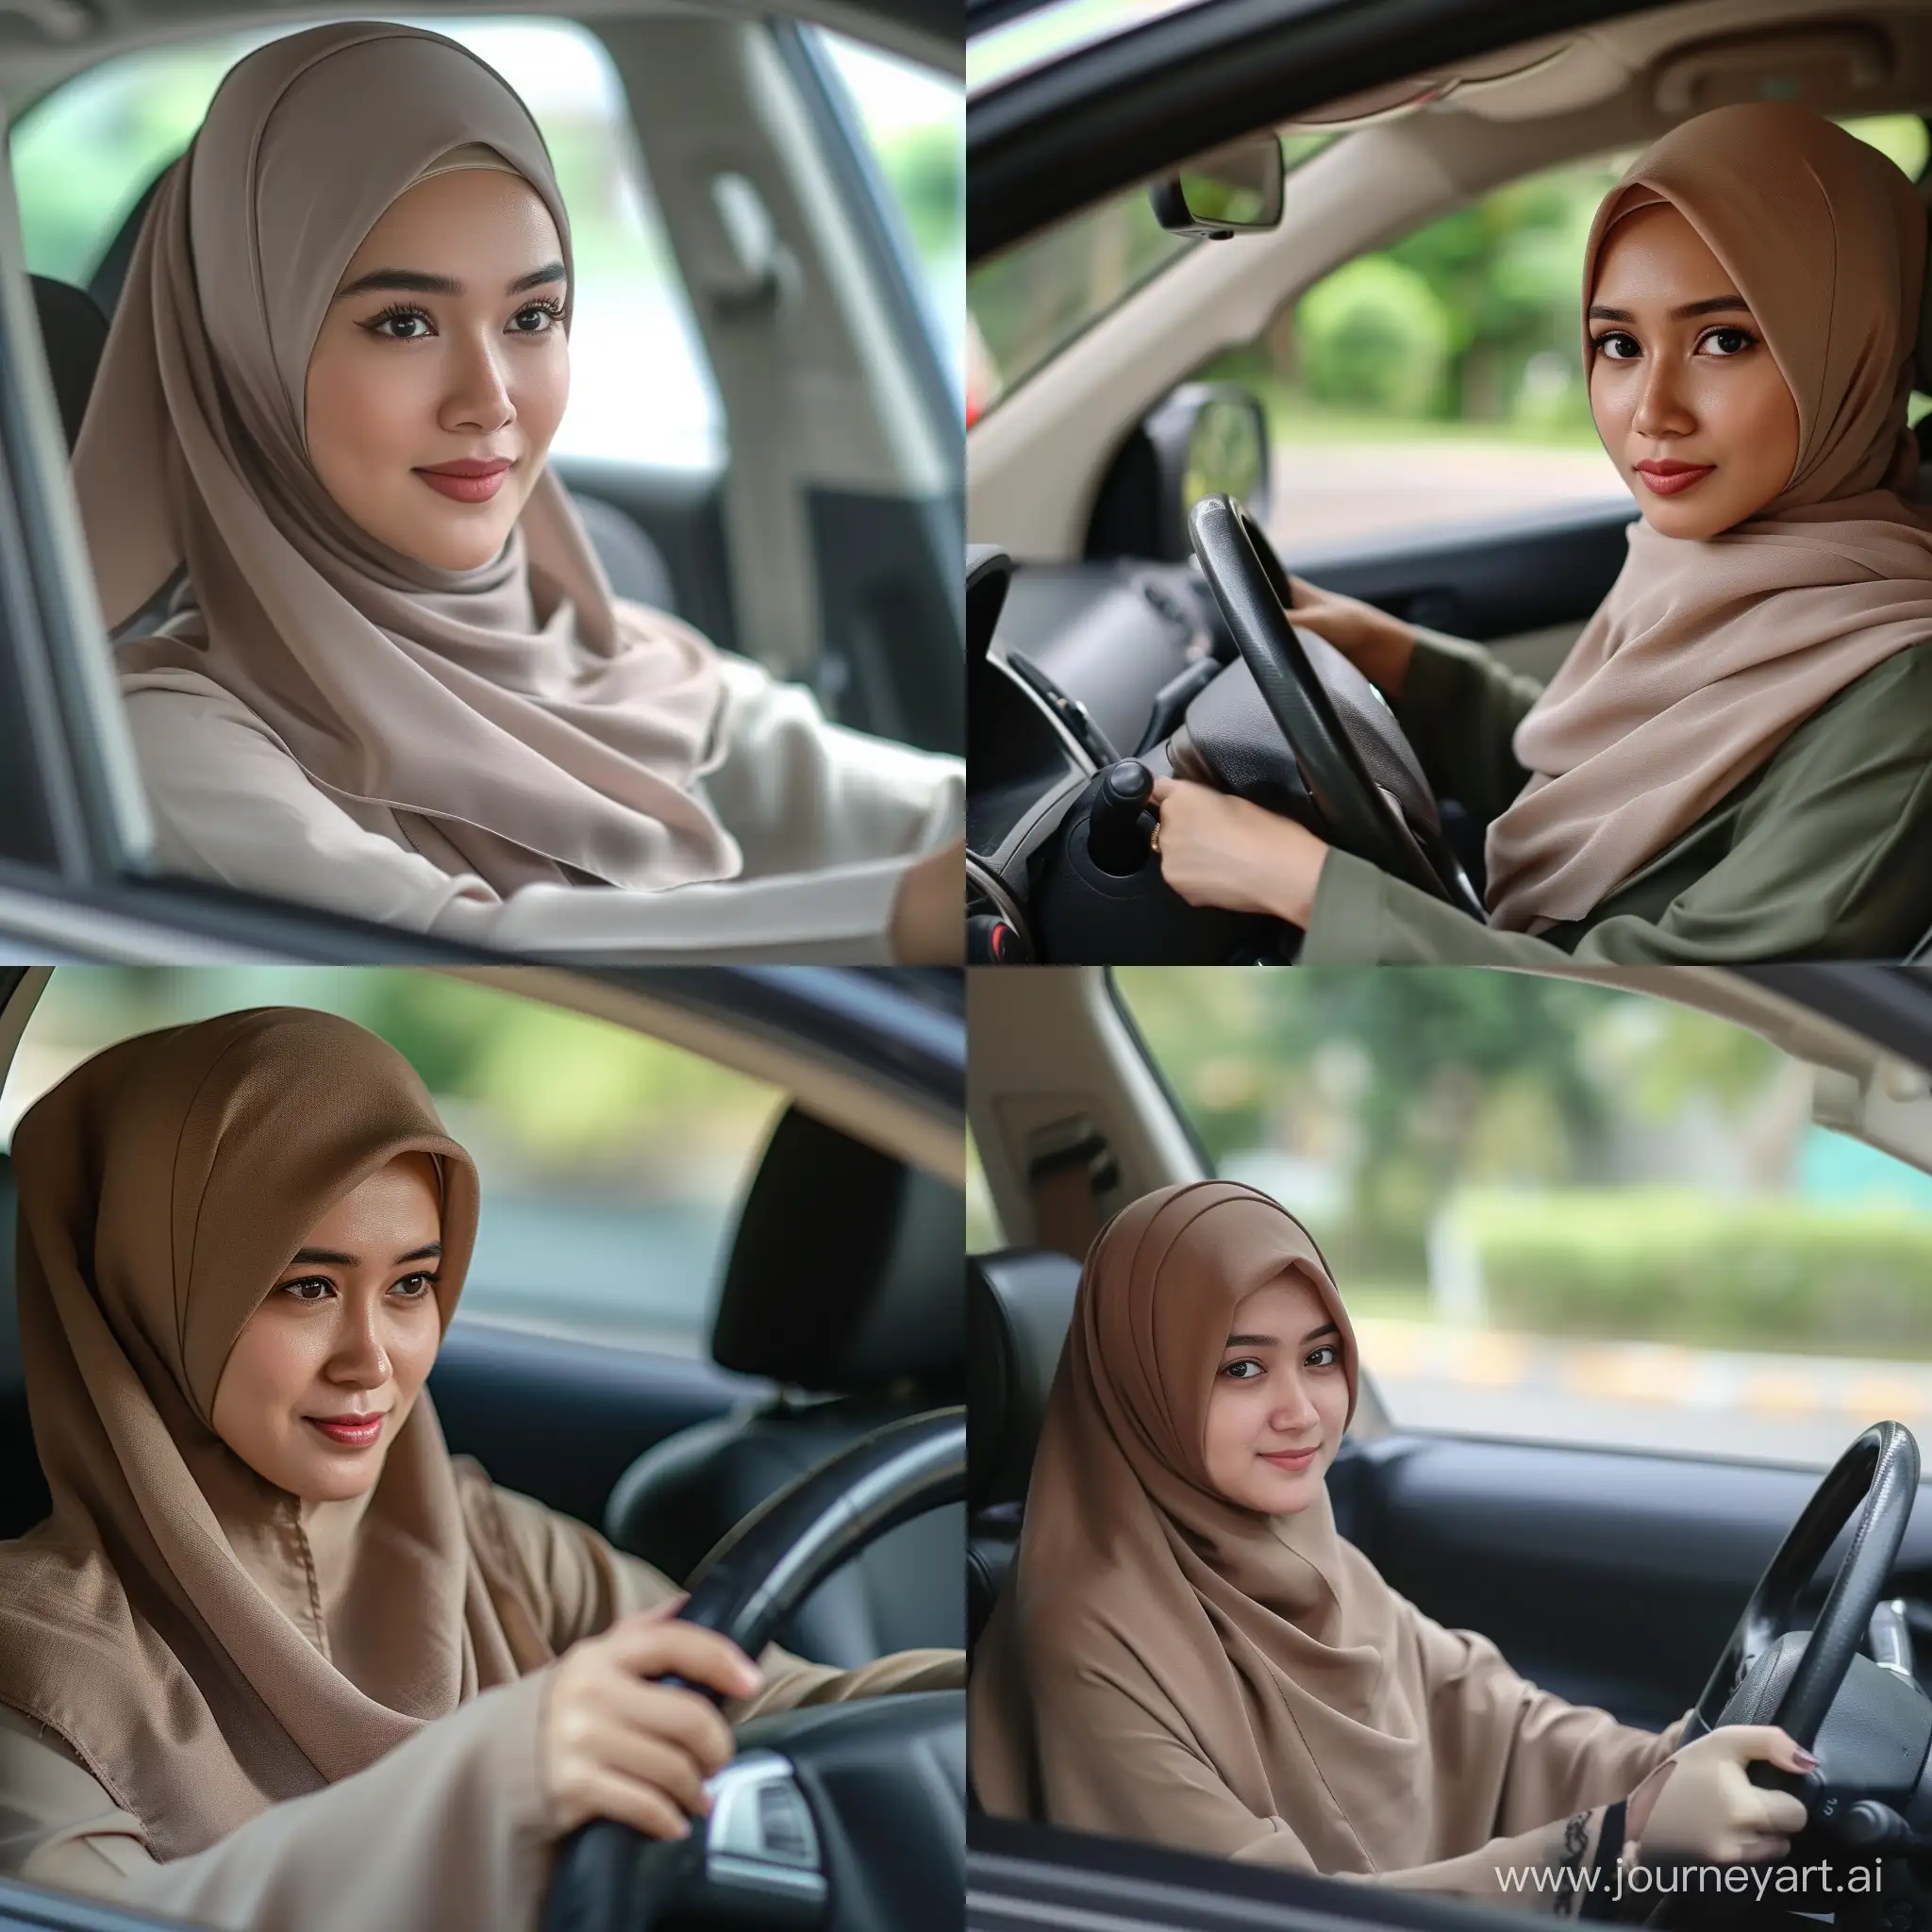 Elegantly-Driving-Indonesian-Hijab-Woman-in-a-Car